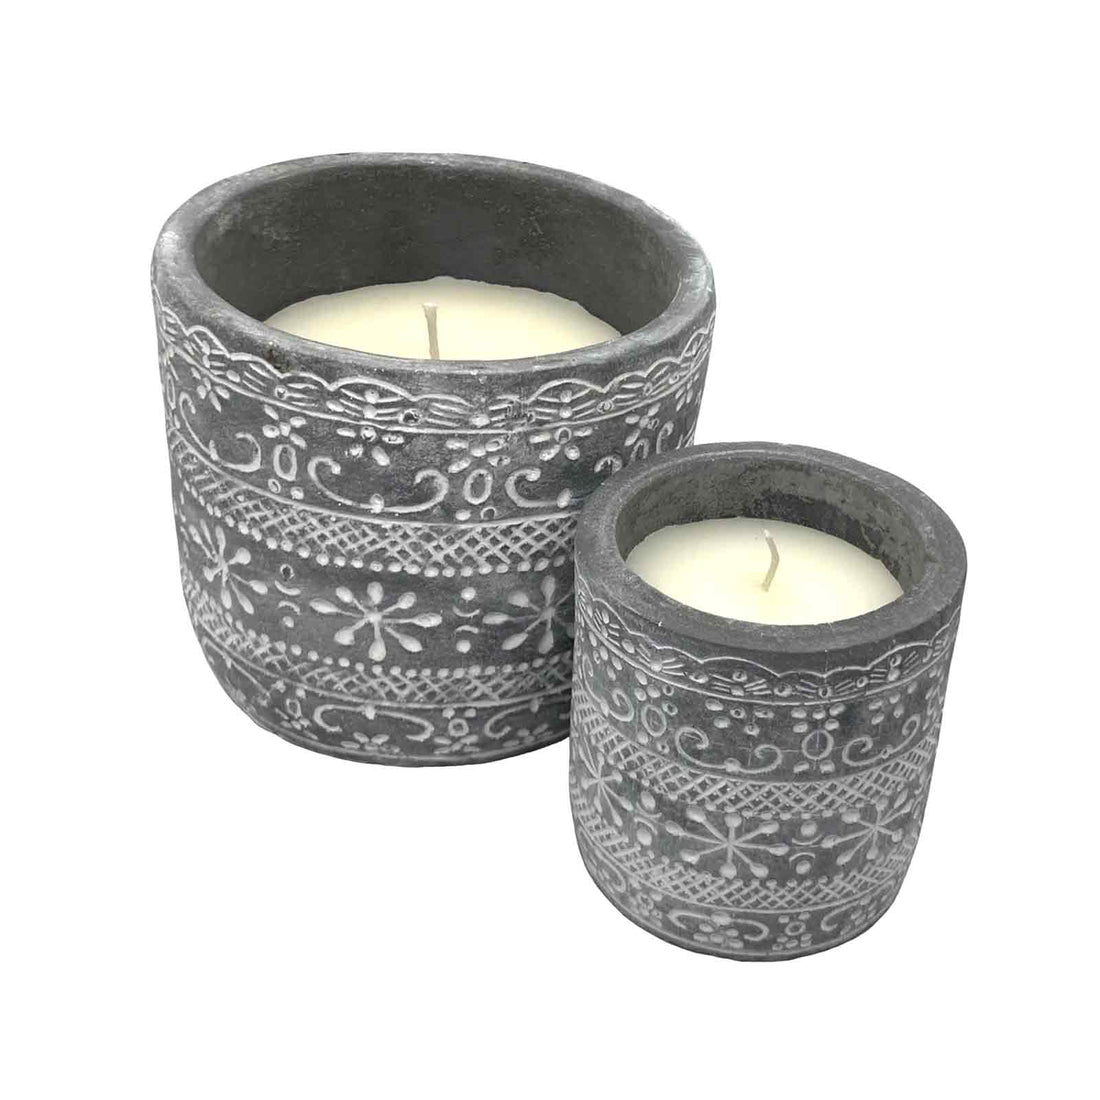 Etched Cement Wax Candle Pots - both large and small